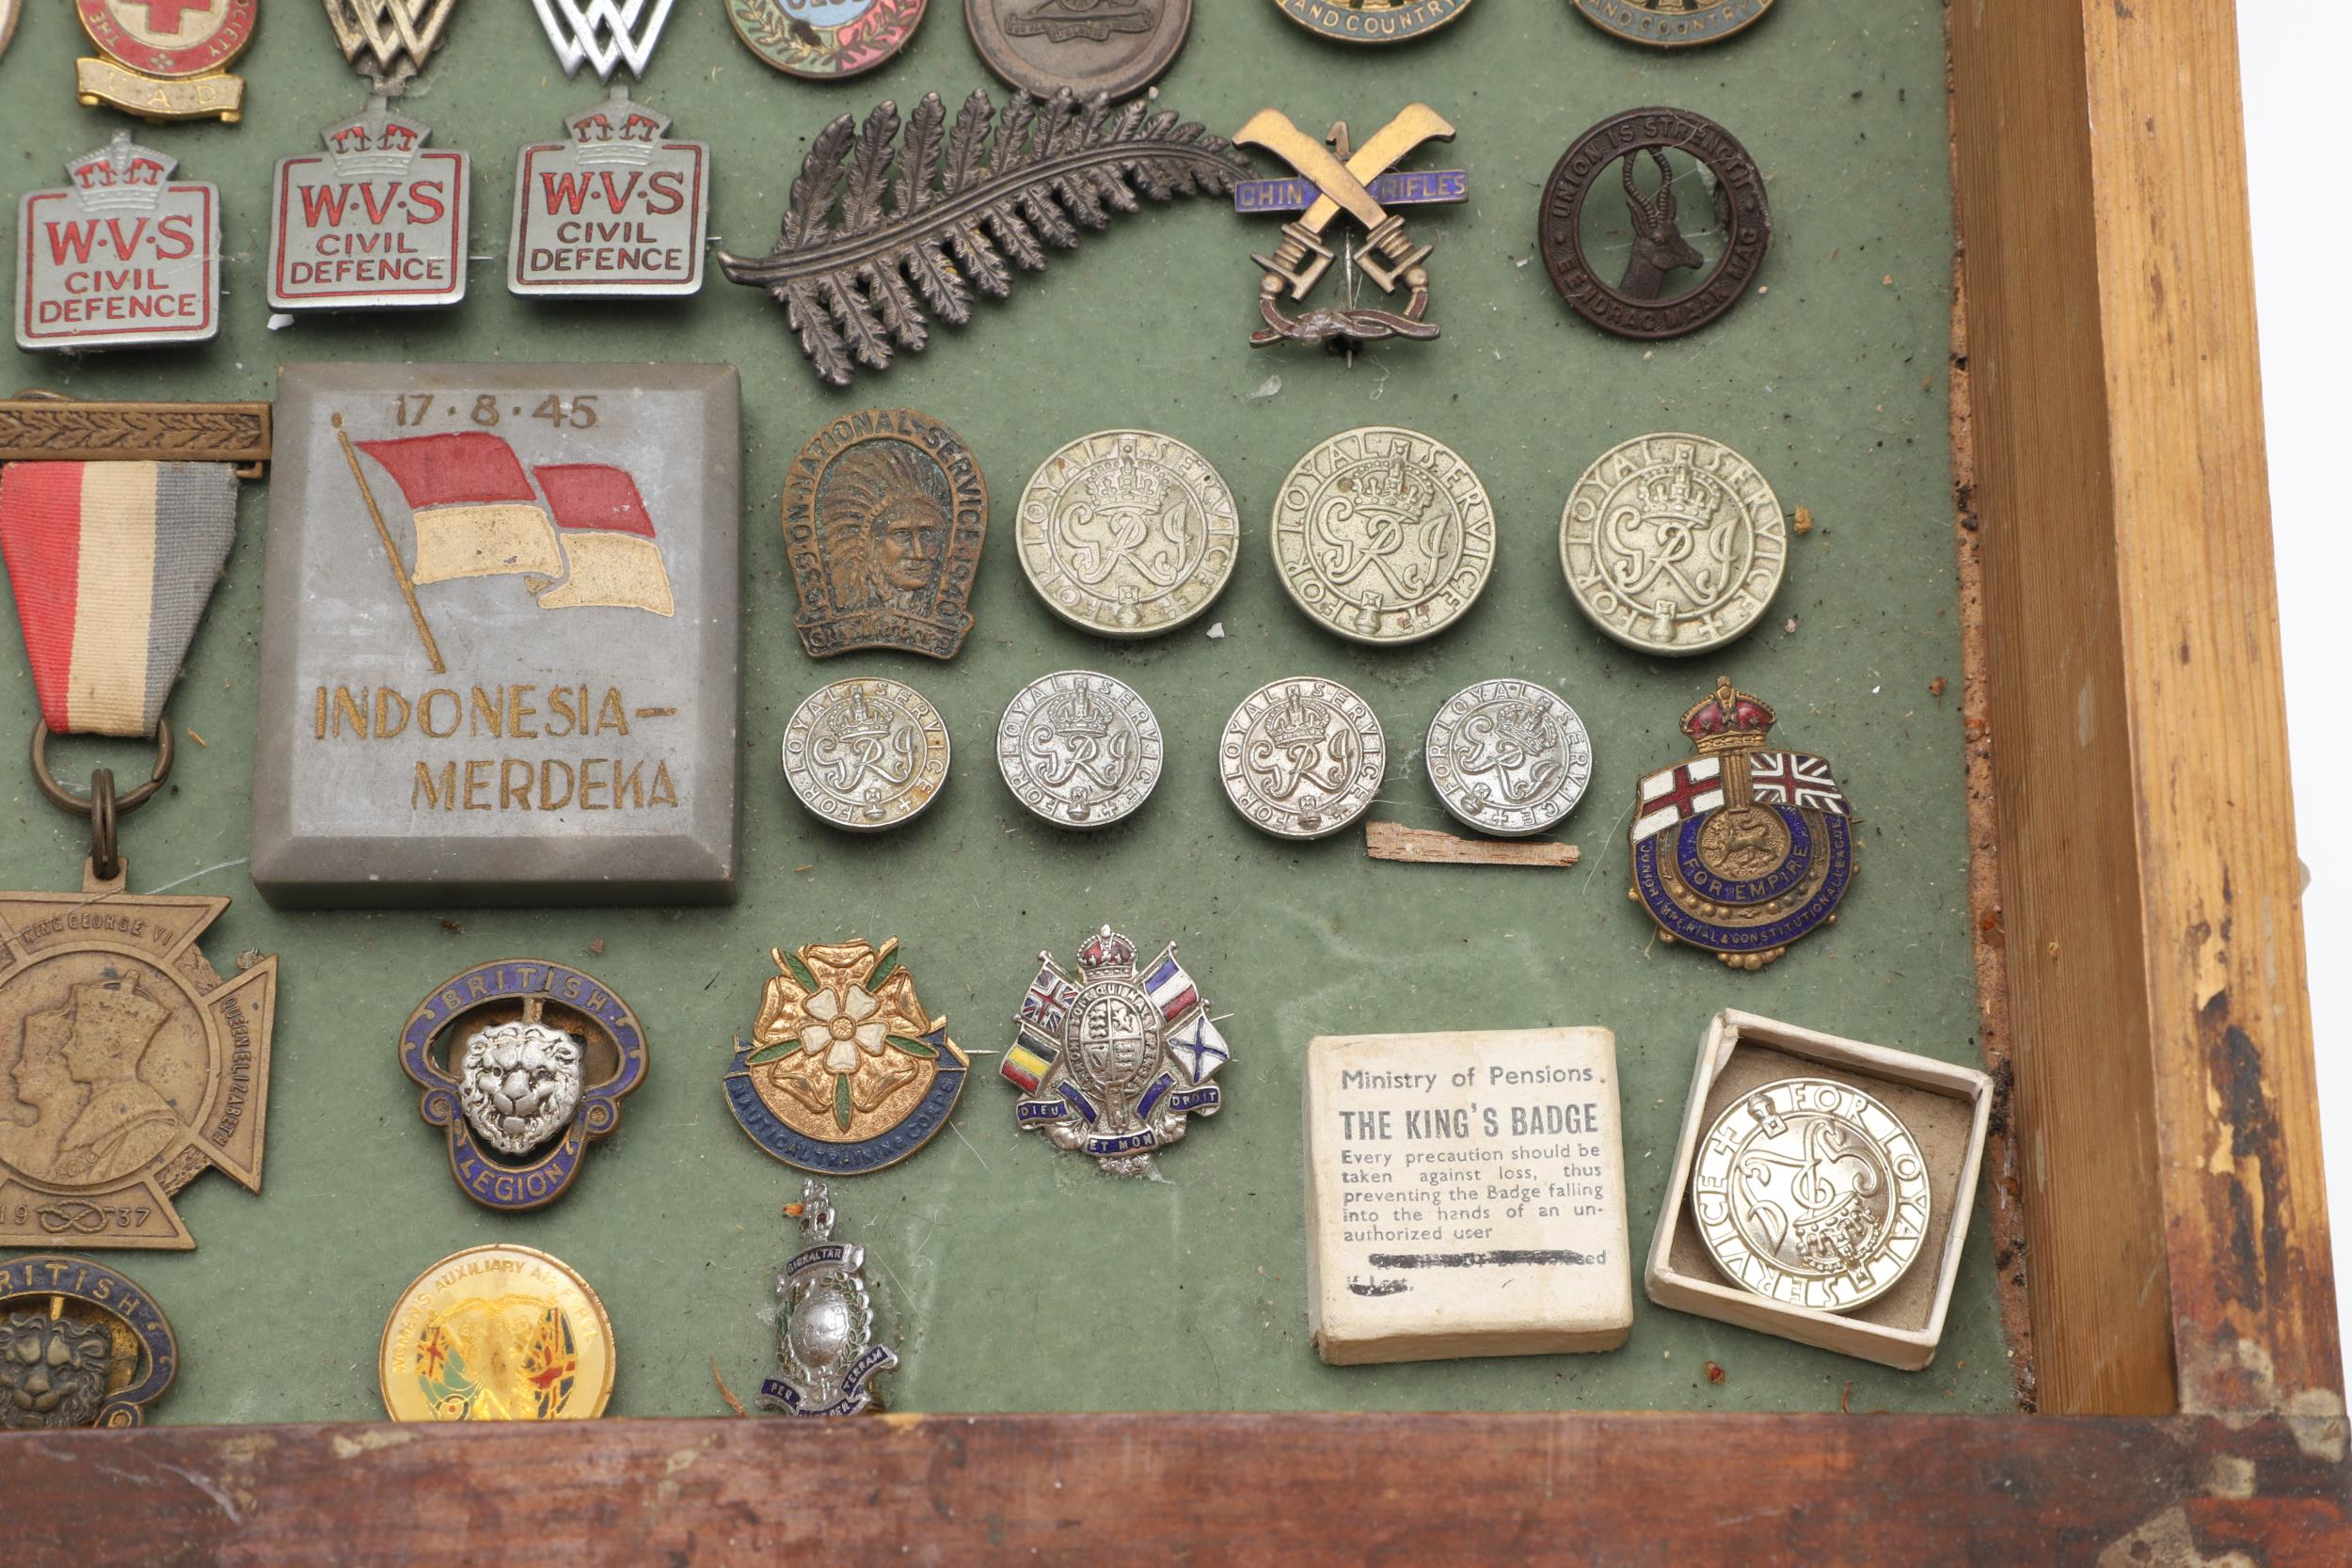 AN INTERESTING COLLECTION OF MILITARY RELATED ENAMEL AND SIMILAR BADGES. - Image 7 of 7